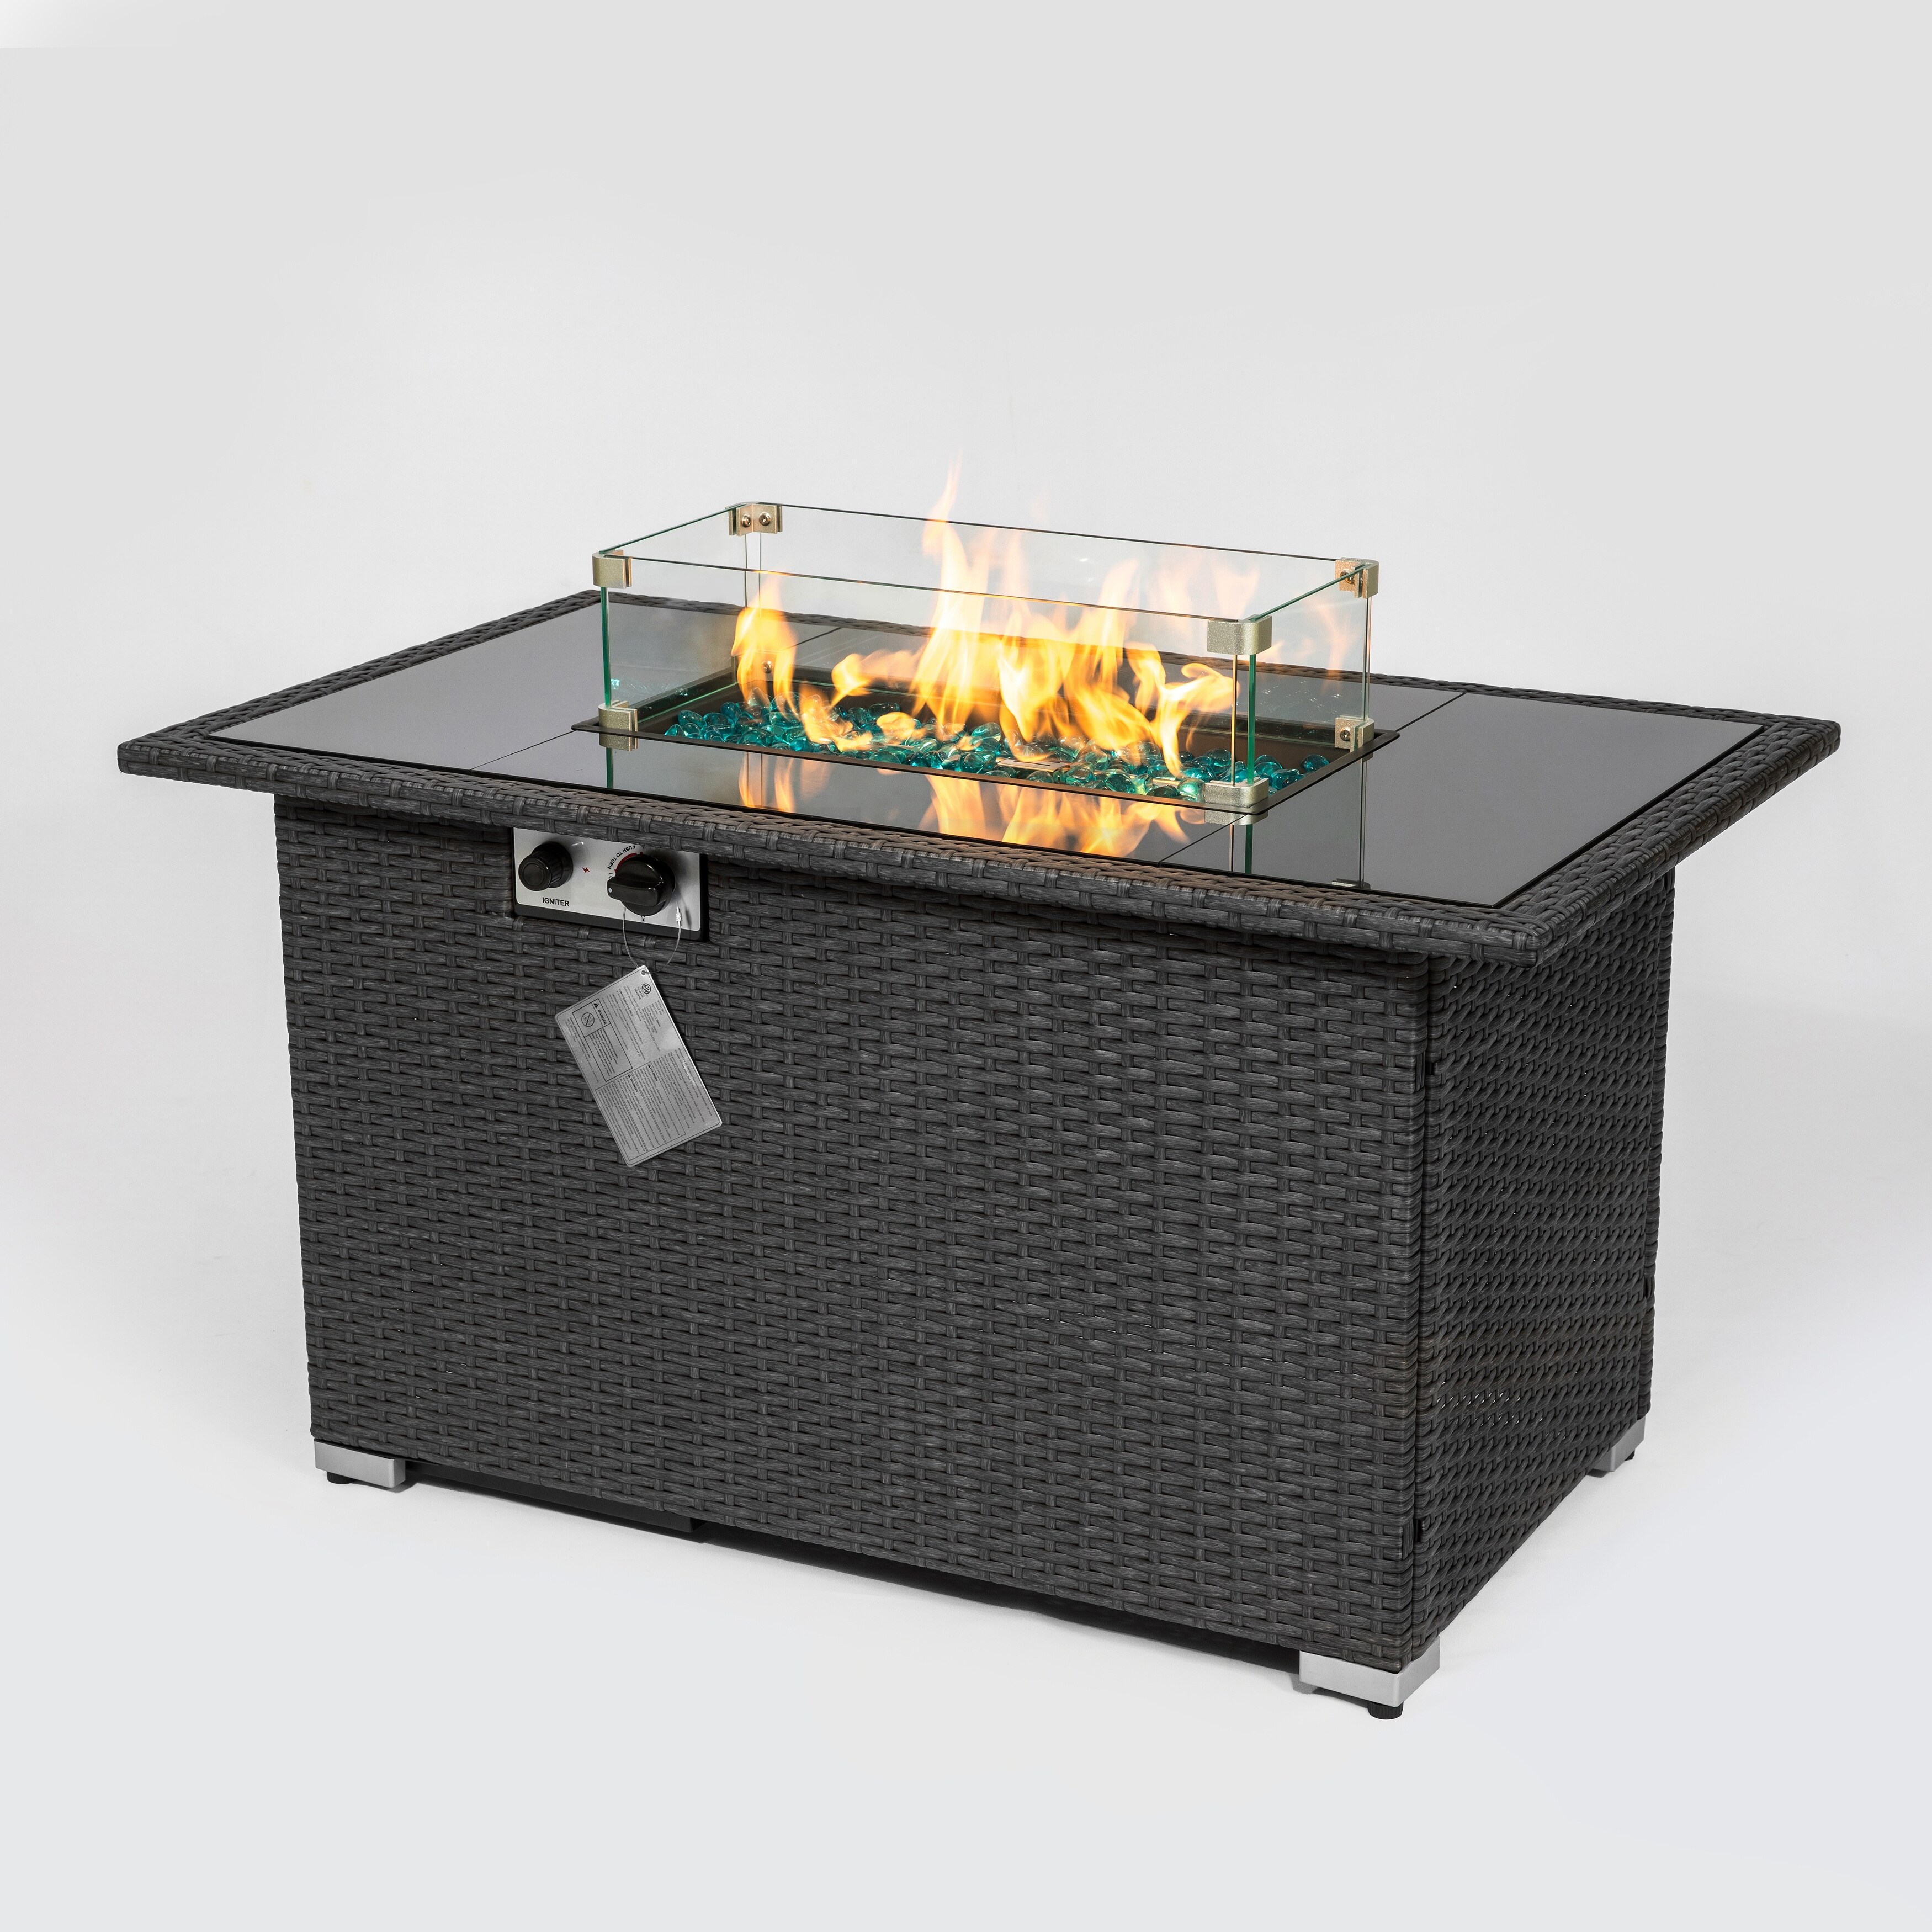 firepitt 44 firepit Table 50,000 BTU Propane fire Pit with Amber fire Glass Outdoor fire Tables with Striped Steel Table top Sturdy fire pits for Outdoor Patio Espre +Wind Glass 